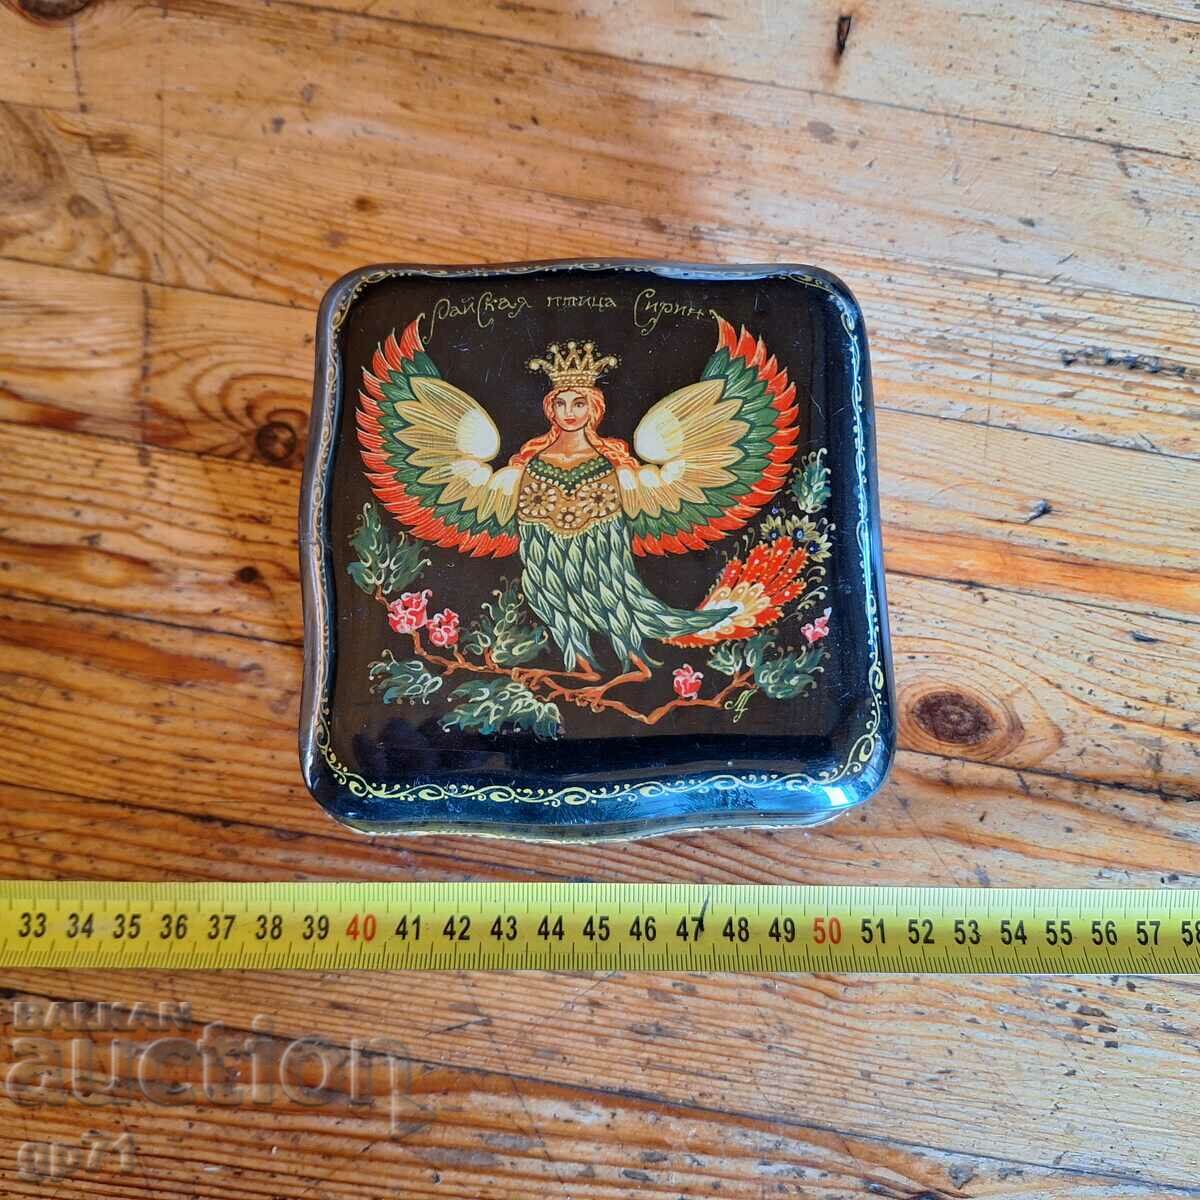 Old Russian Lacquer Painted Box.